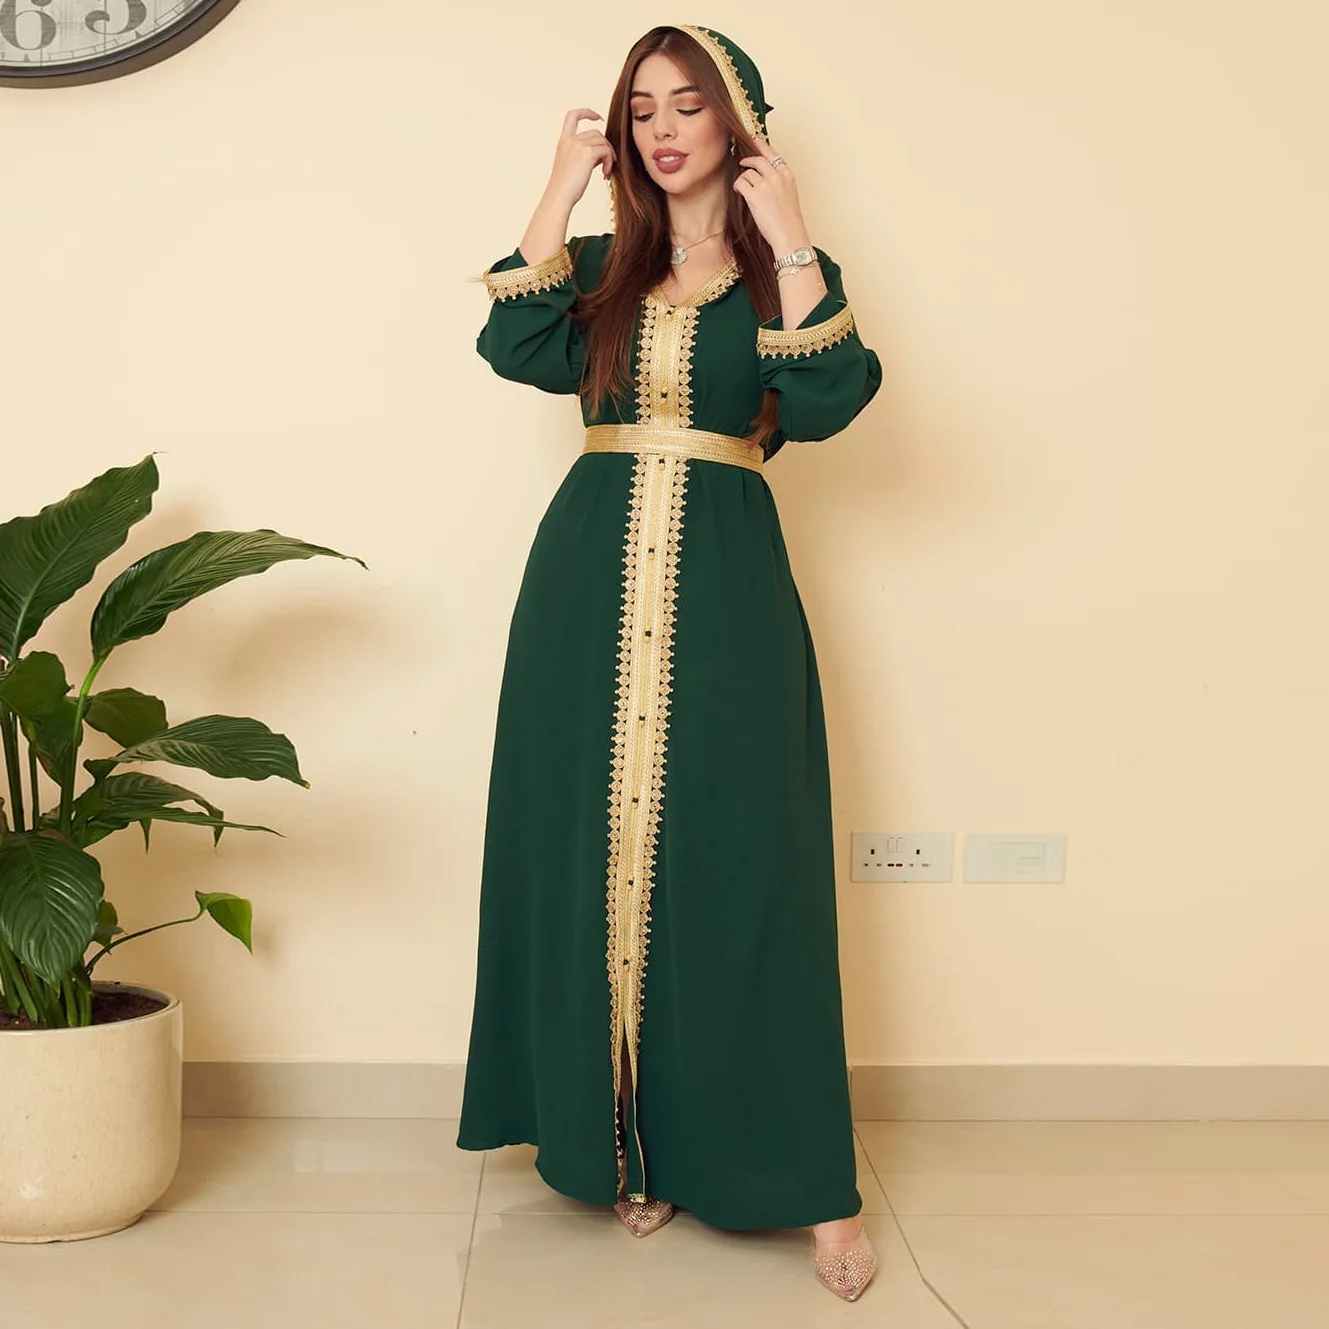 

Dresses For Muslim Women Lace Embroidery V-Neck Long Sleeve Party Maxi Dress With Belt Elegant Moroccan Kaftan Turkey Wears